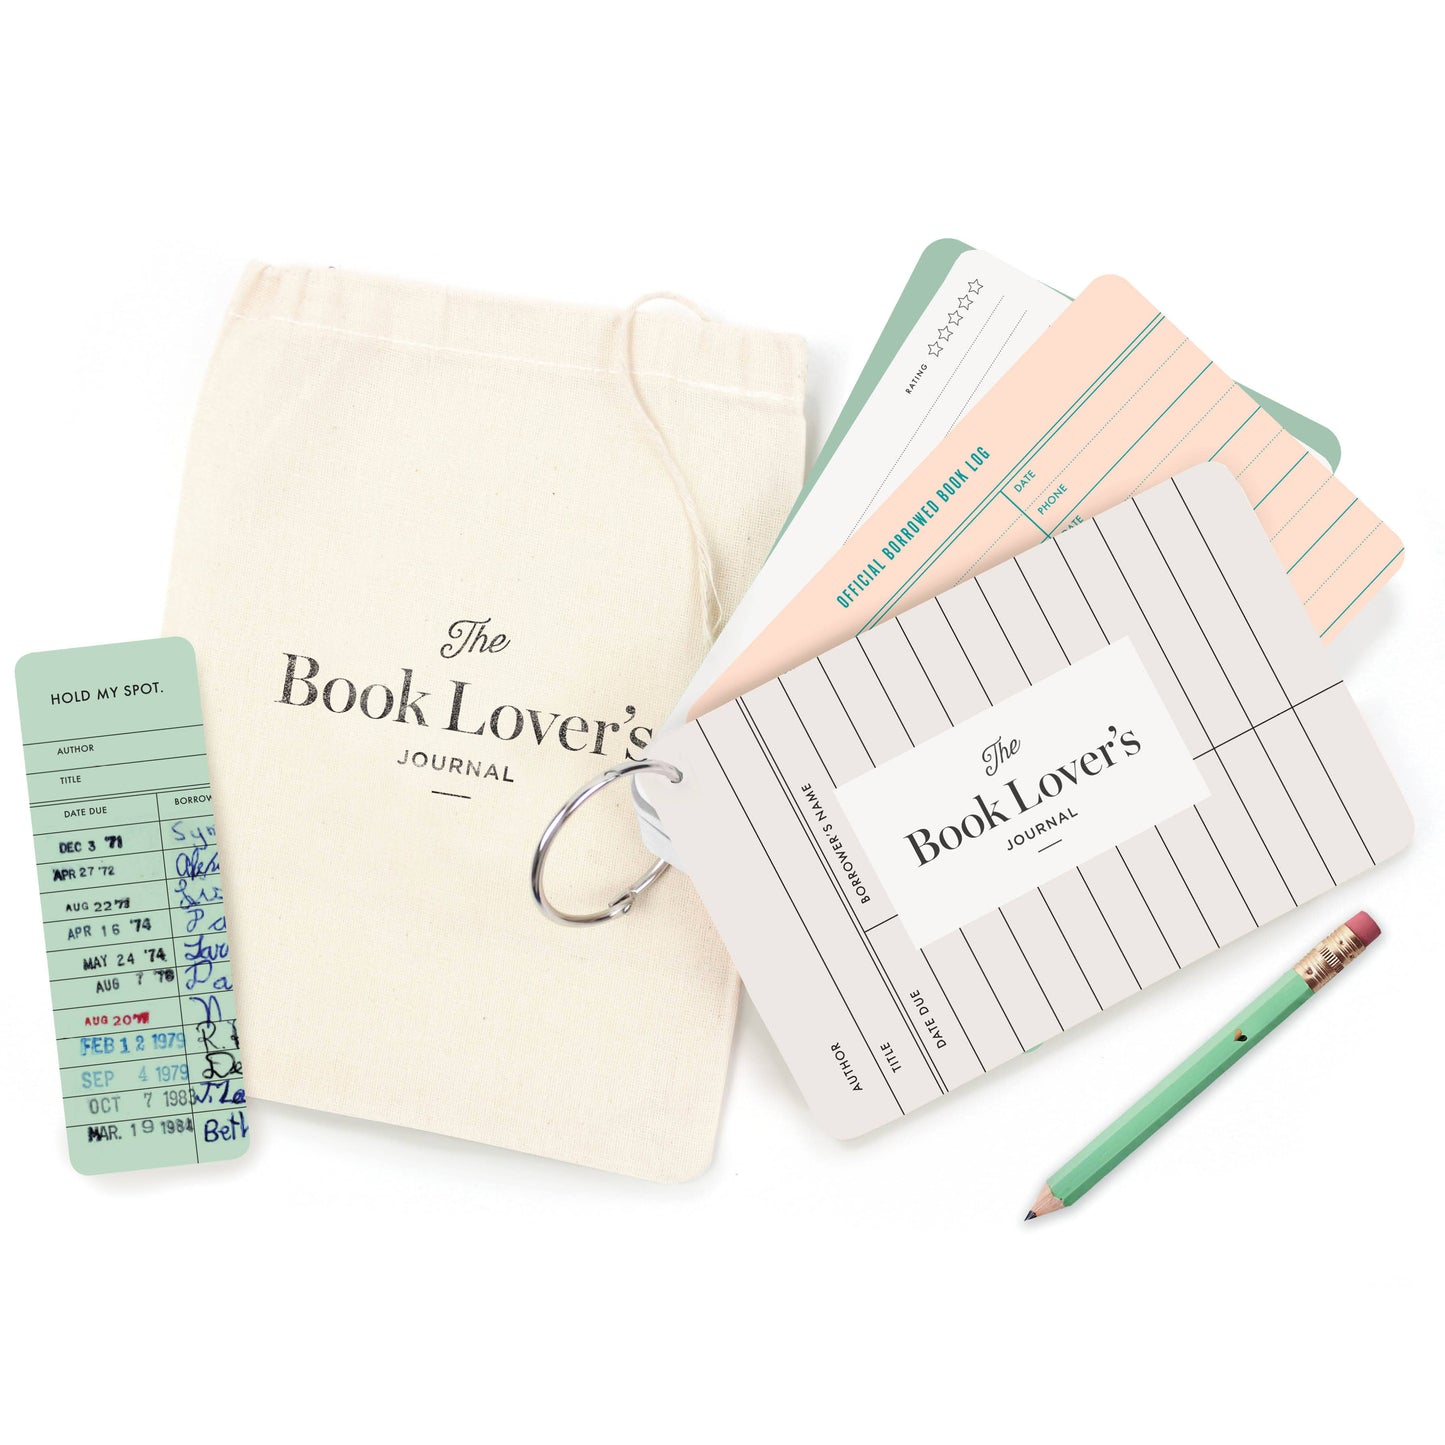 Card stock bound by a ring. The cover says "The Book Lover's Journal". Accompanied by a small canvas bag to hold the journal.